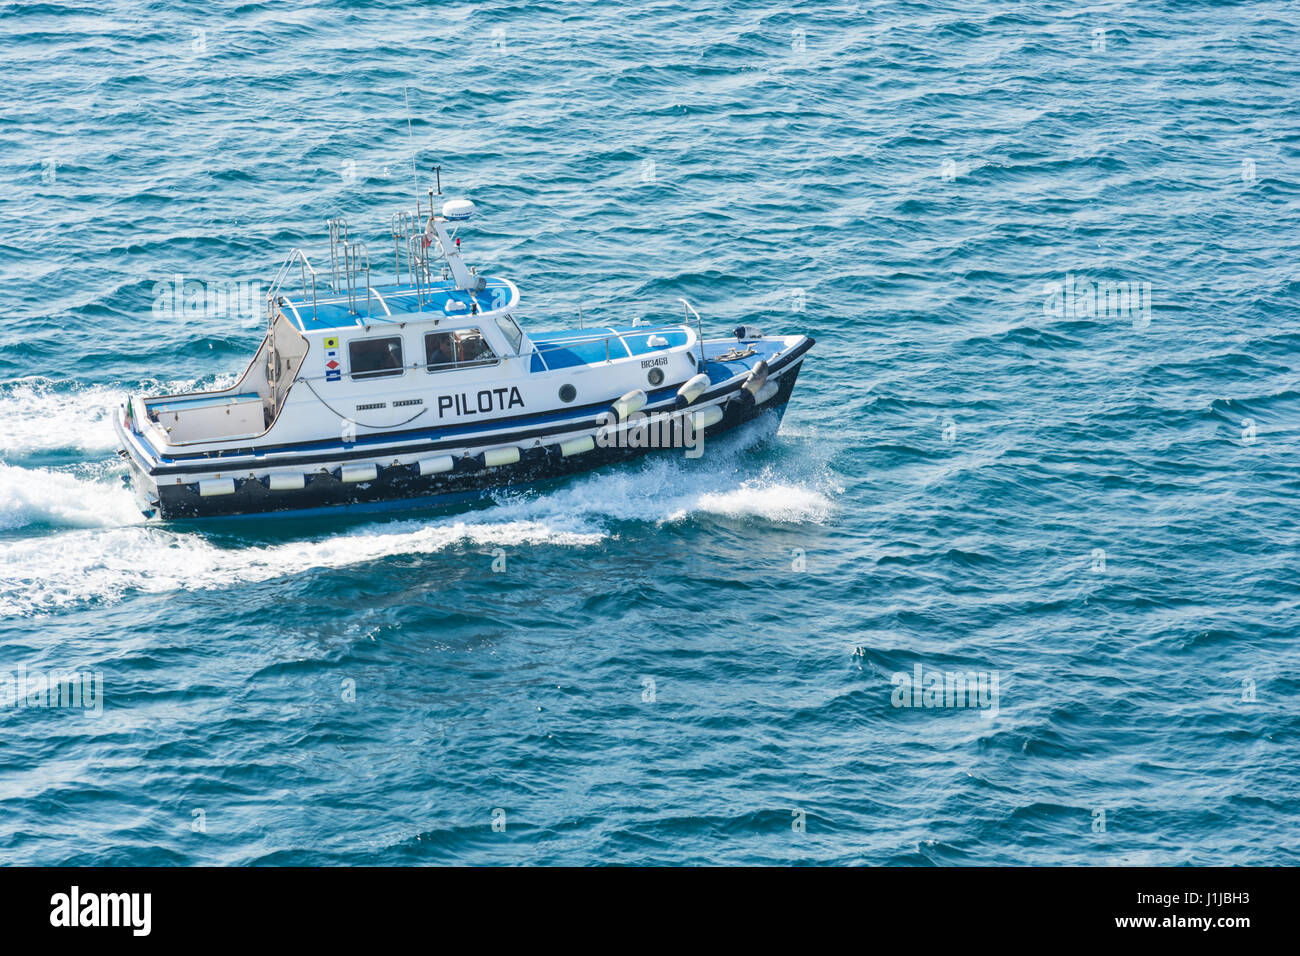 Abstract and conceptual help. A pilot boat in sea. A pilot boat is a type of boat used to transport maritime pilots between land and the inbound or ou Stock Photo